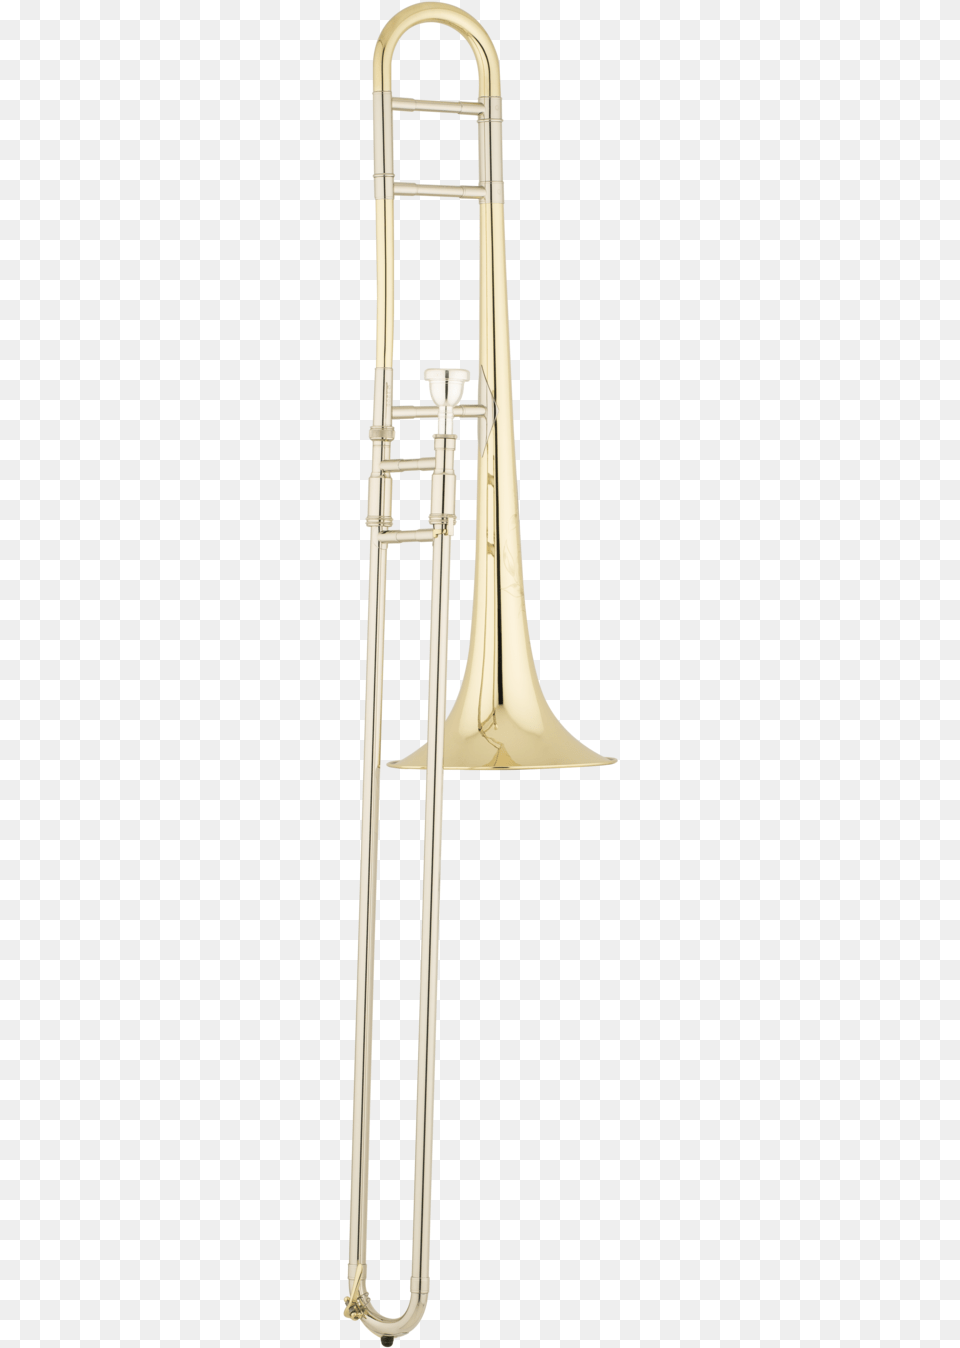 Shires Trombone Tbq33 Front 0718 Playground Slide, Musical Instrument, Brass Section Png